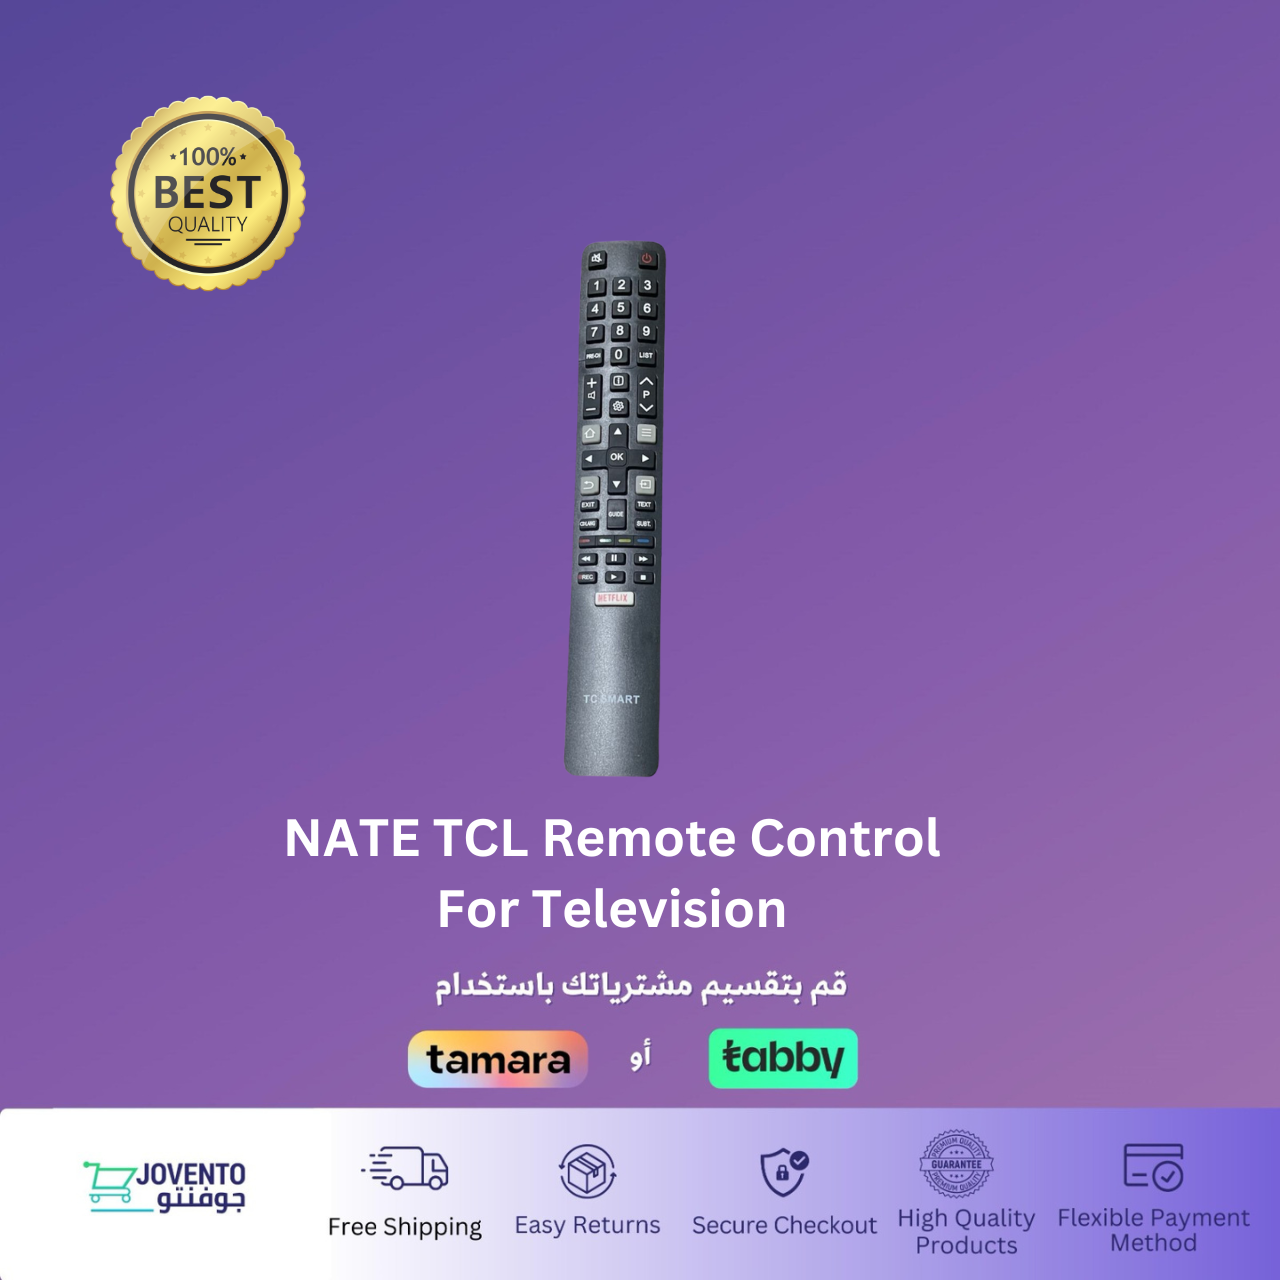 NATE TCL Remote Control For Television